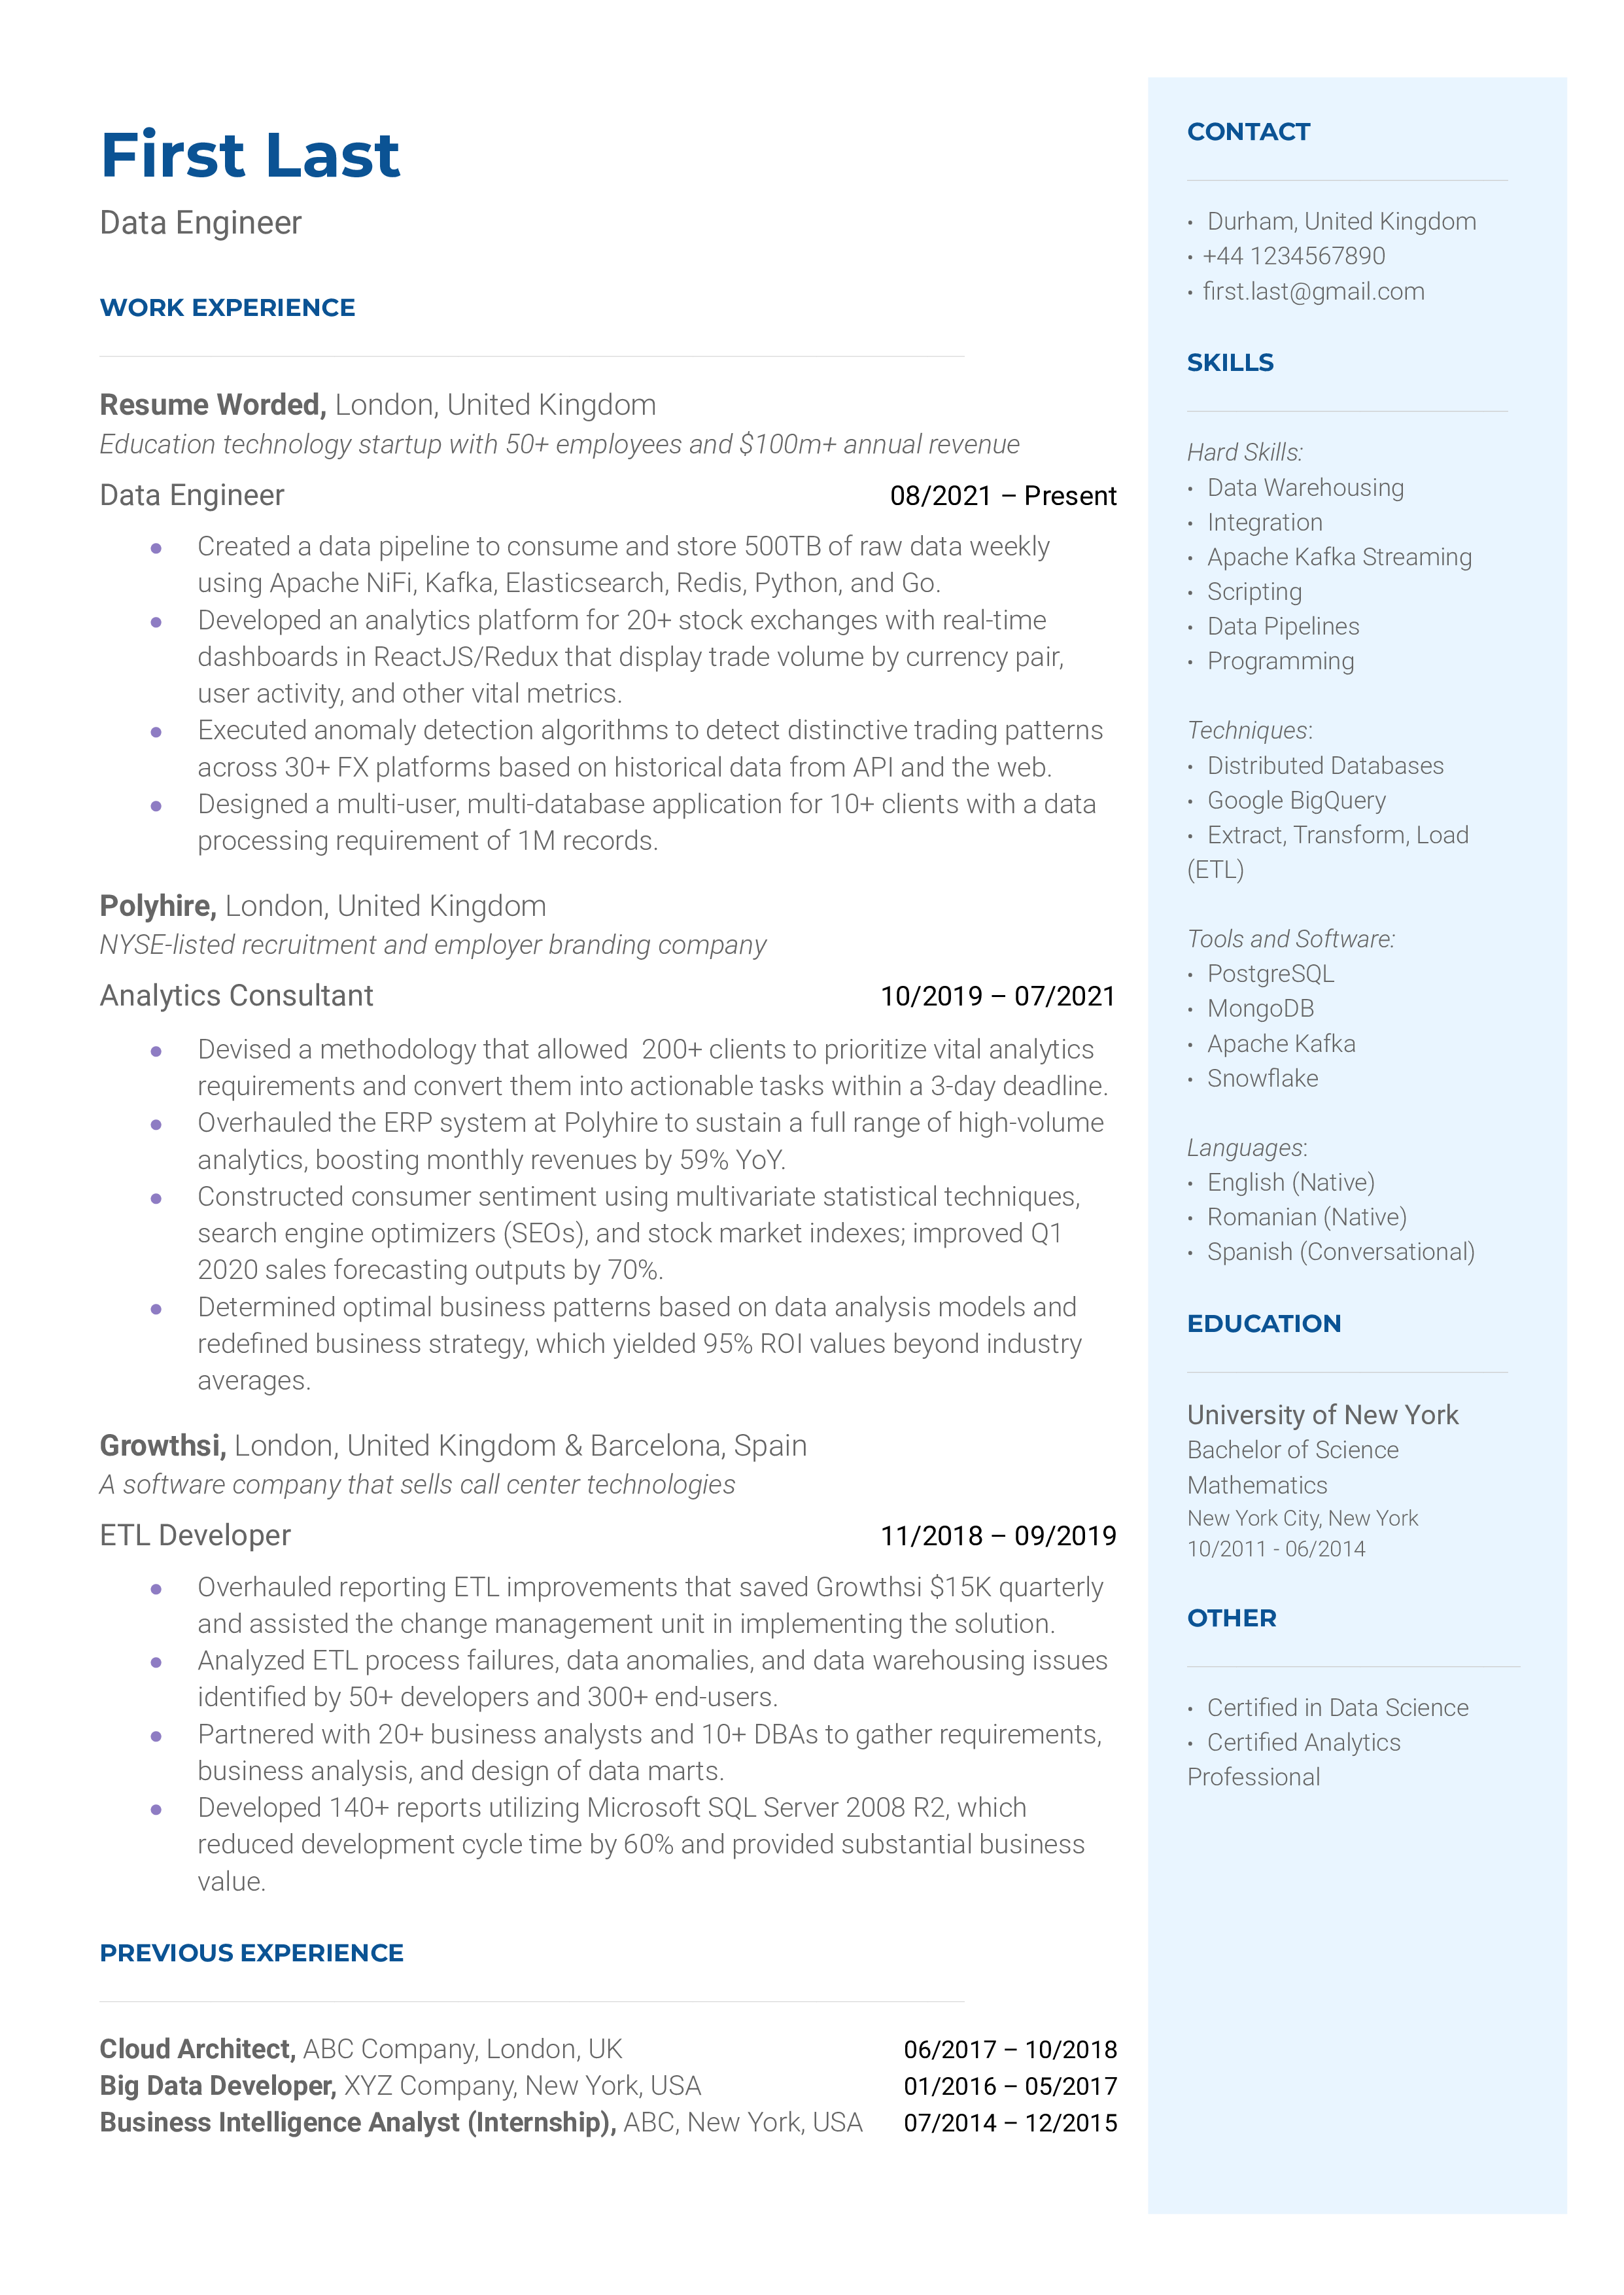 Data Engineer's CV showcasing technical skills and project experiences.